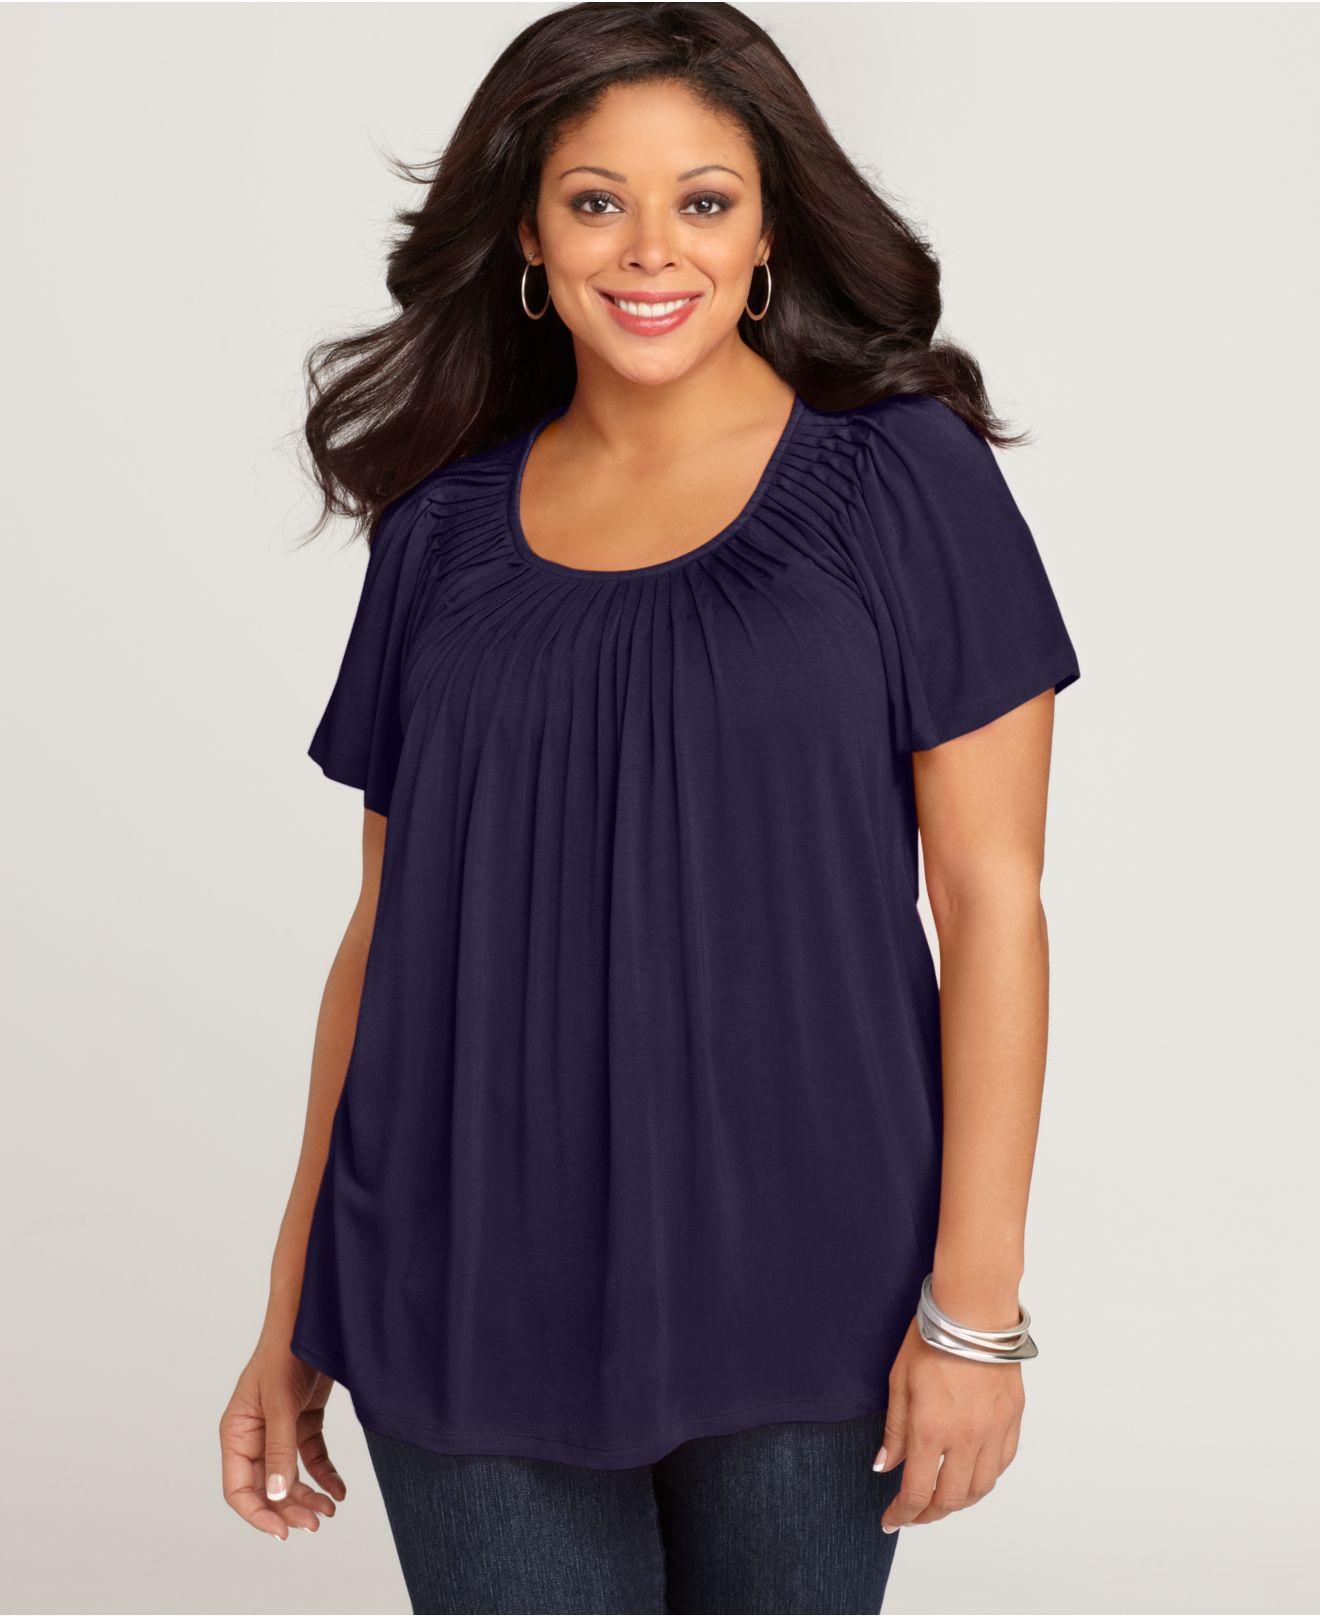 Lyst - Style & Co. Style&Co. Plus Size Short-Sleeve Pleated Top in Purple